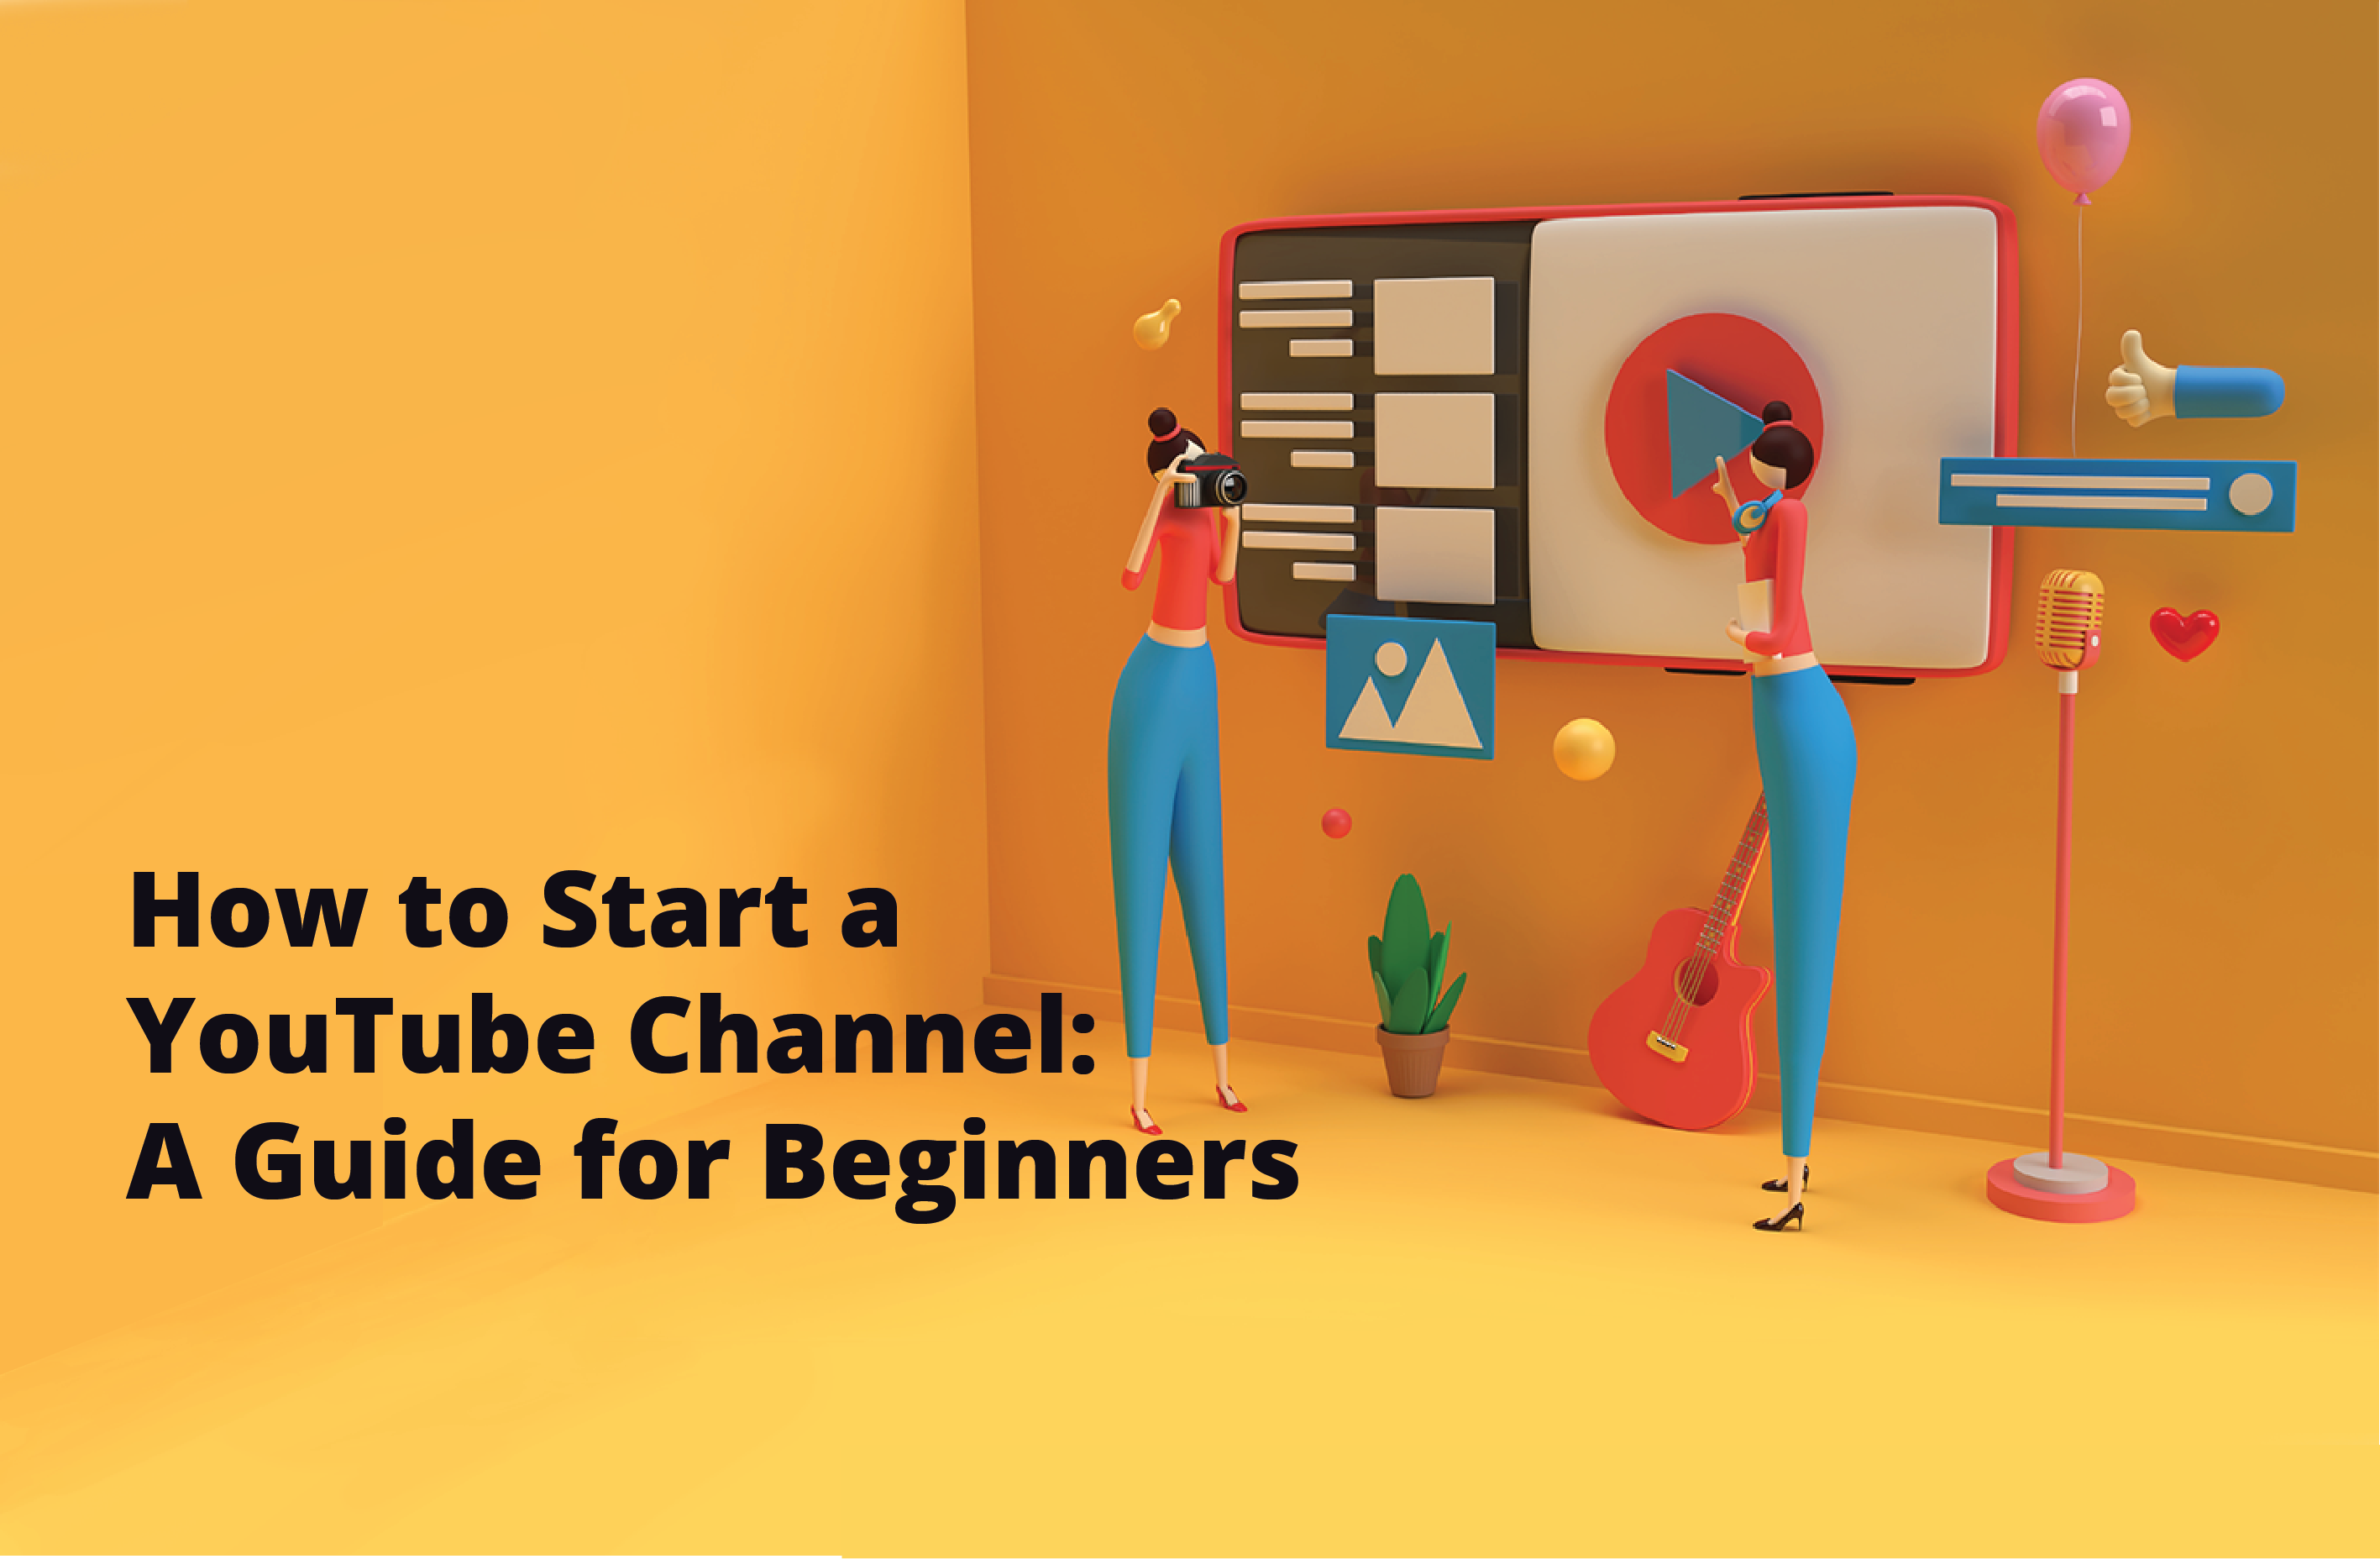 How to Start a YouTube Channel: A Guide for Beginners